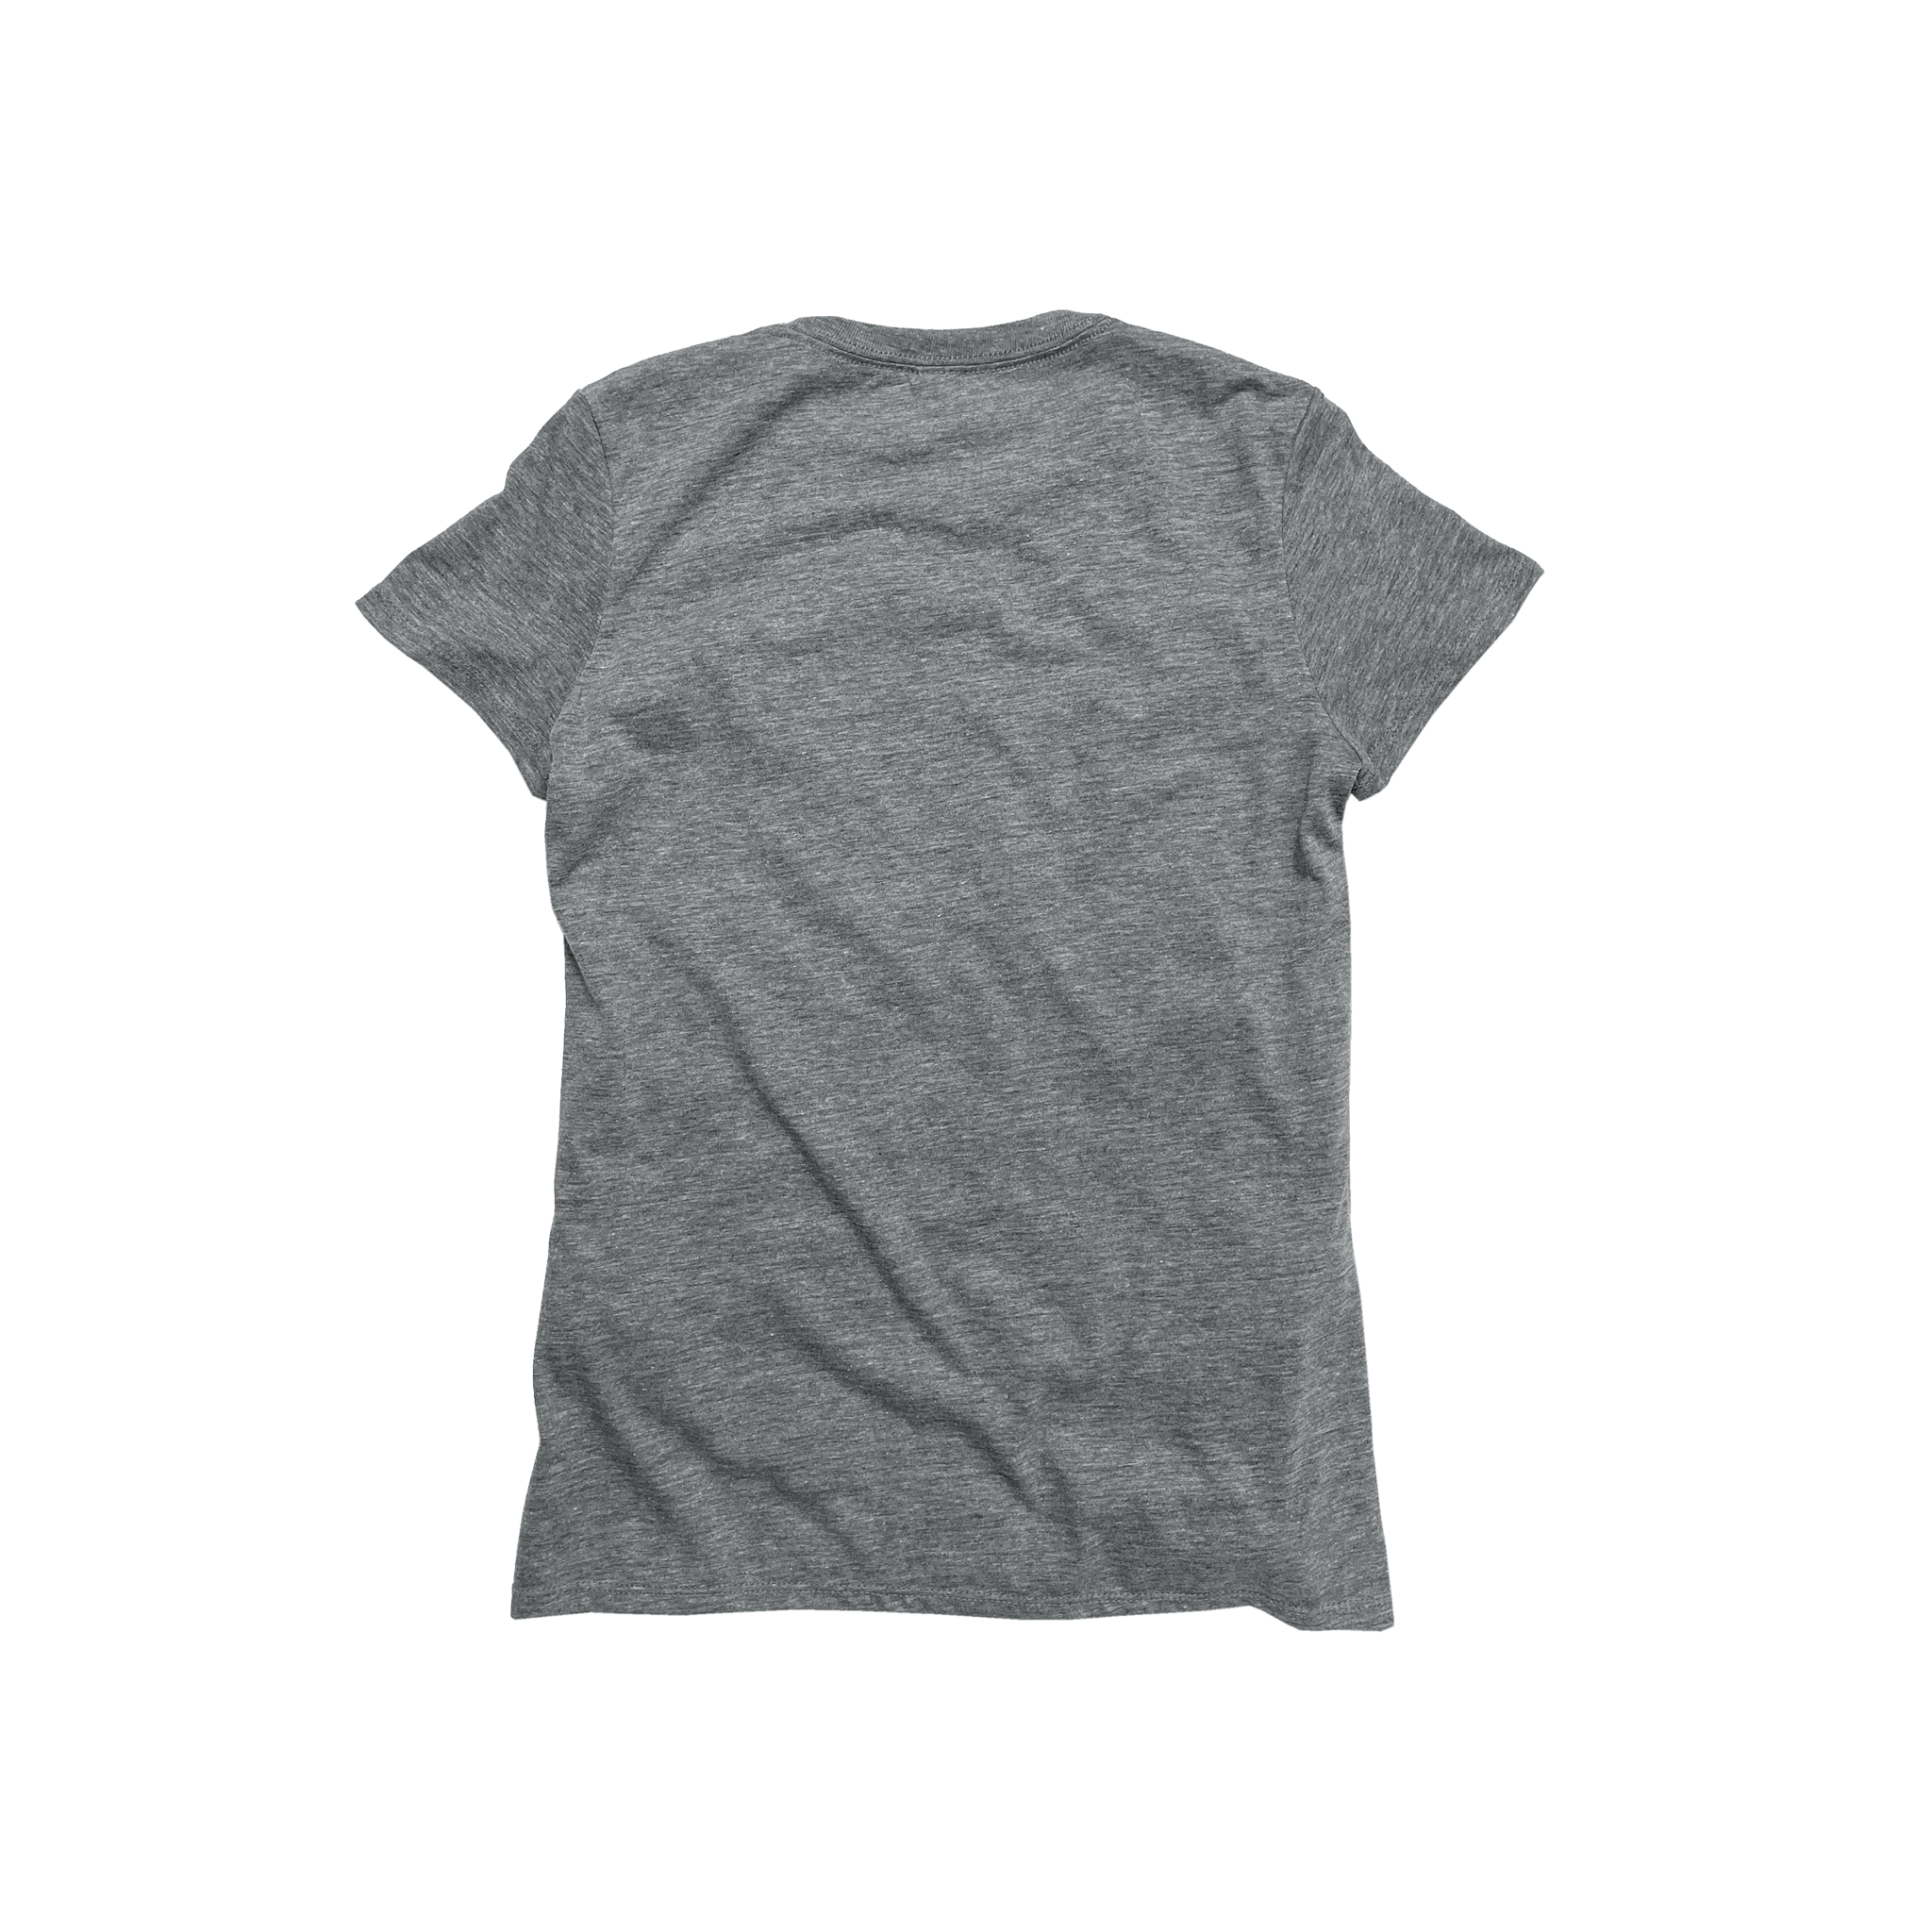 Back Flat Lay of GOEX Ladies Eco Triblend Tee in Heather Grey